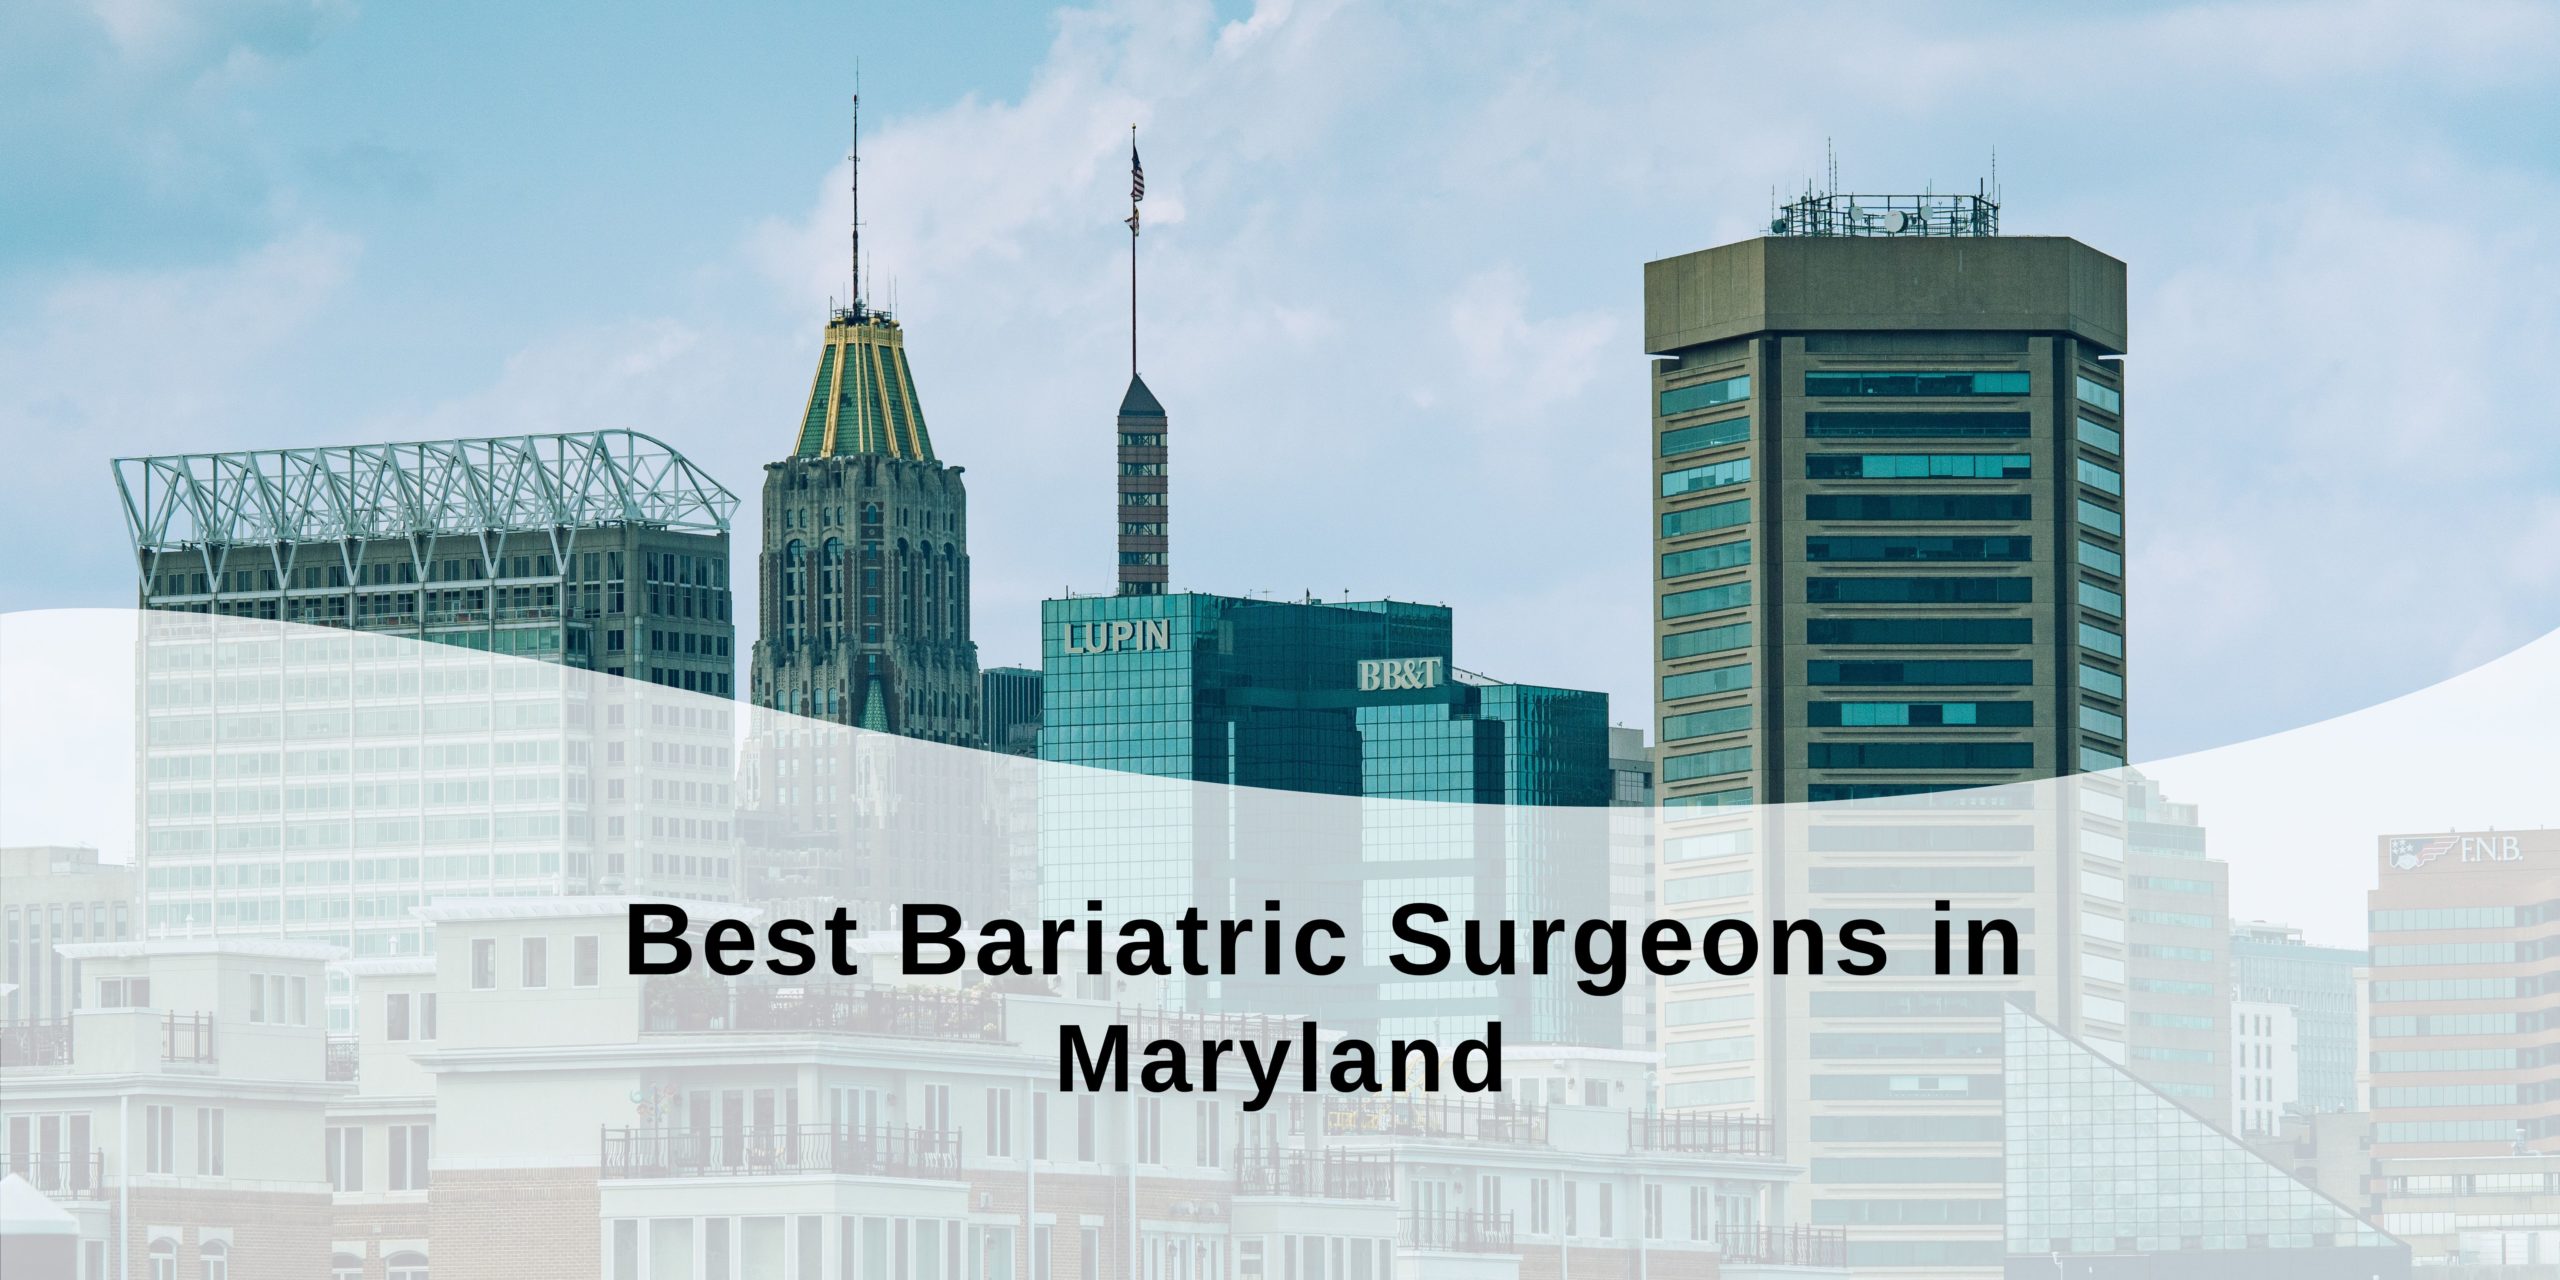 Best bariatric surgeons in maryland